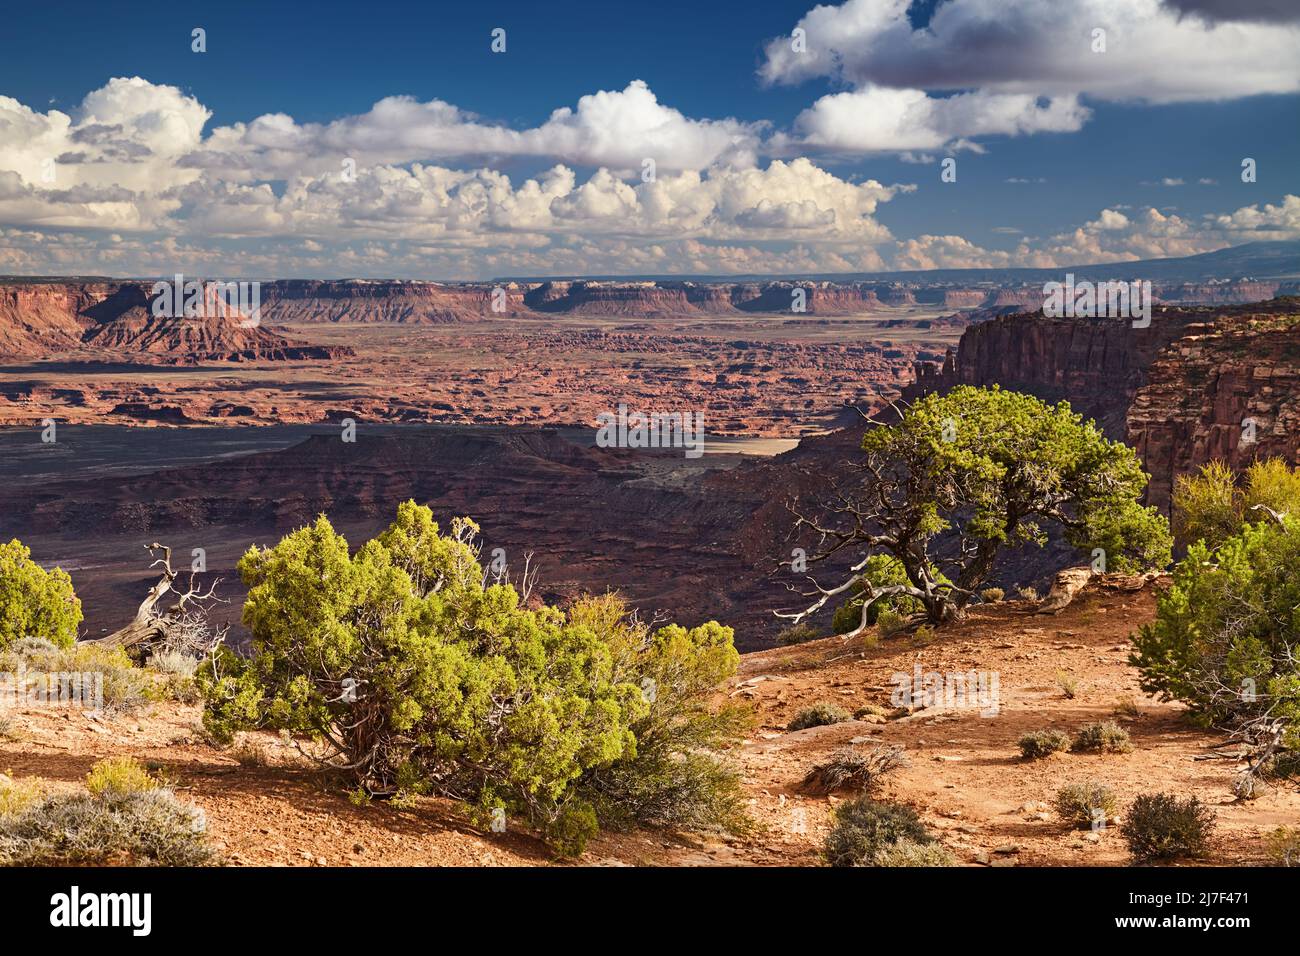 Island in the Sky, Canyonlands National Park, Utah, USA Banque D'Images